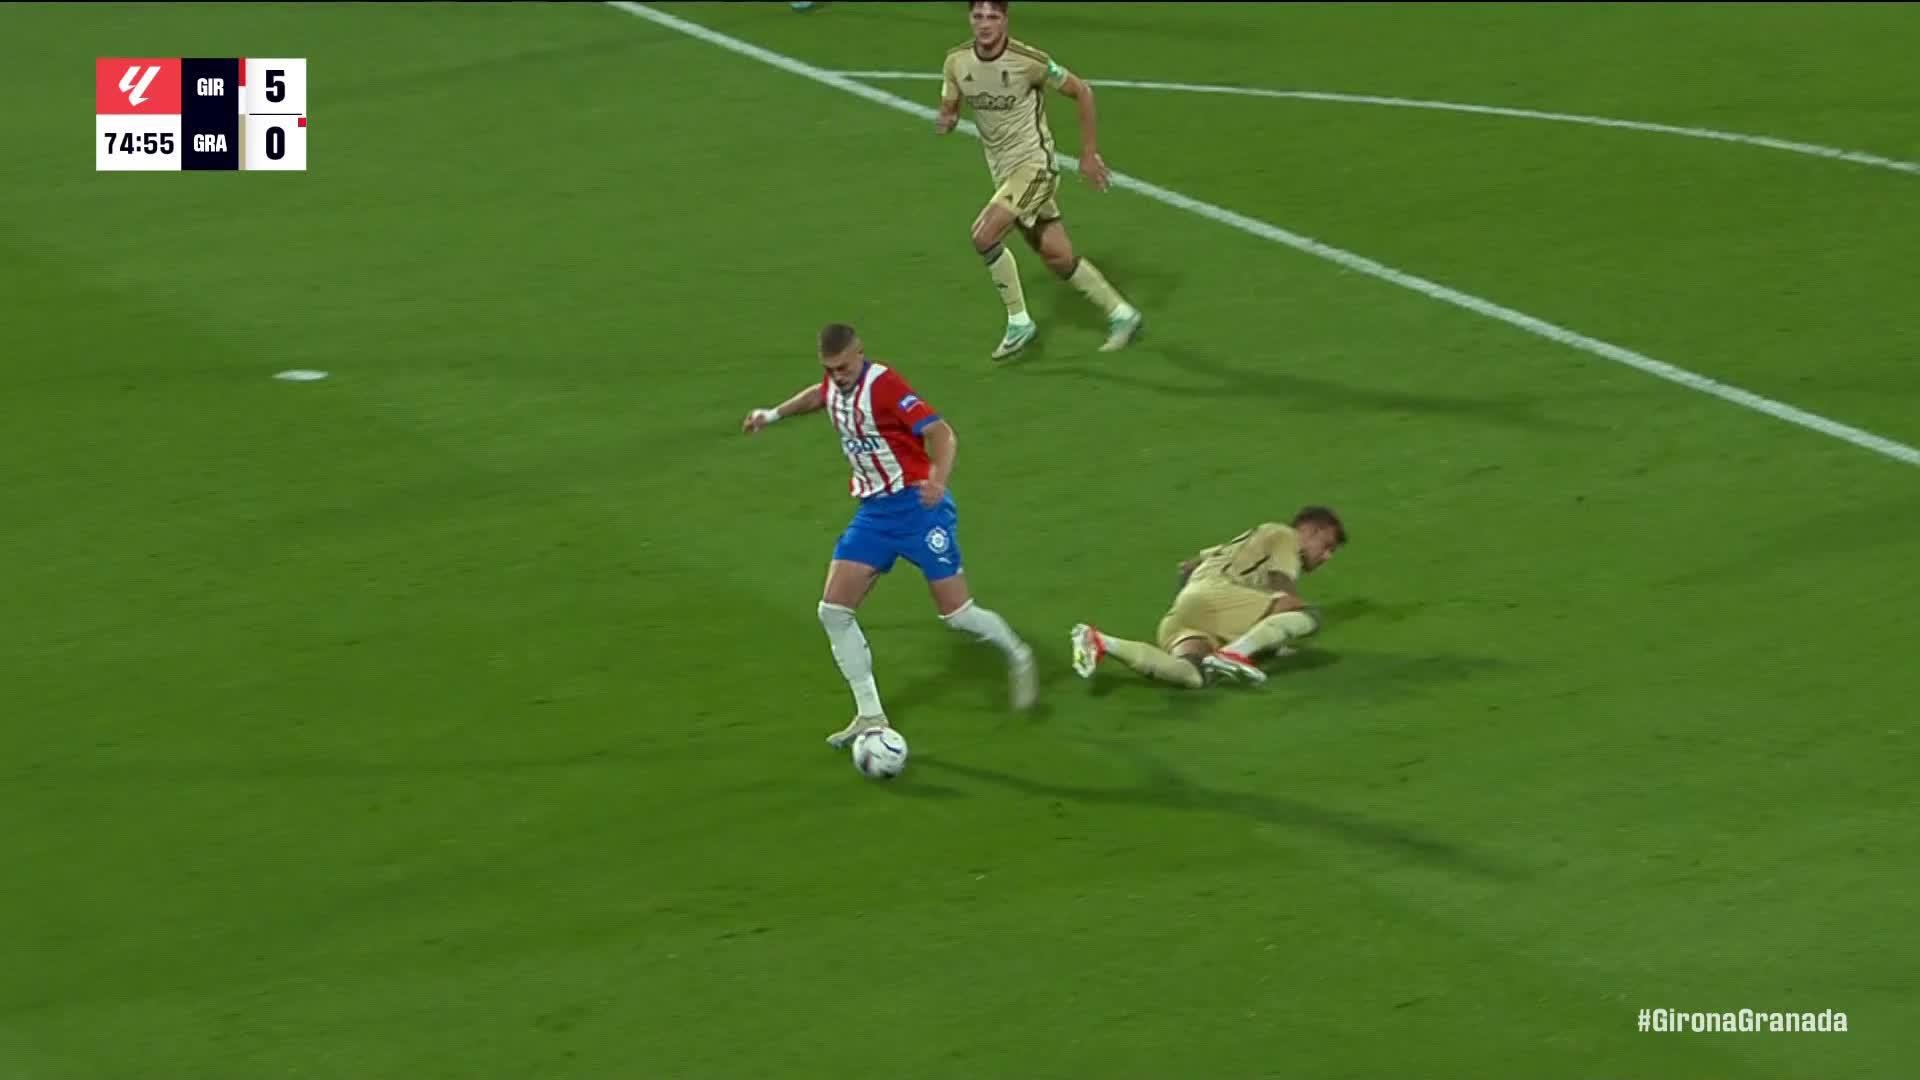 Artem Dovbyk finds the back of the net for Girona